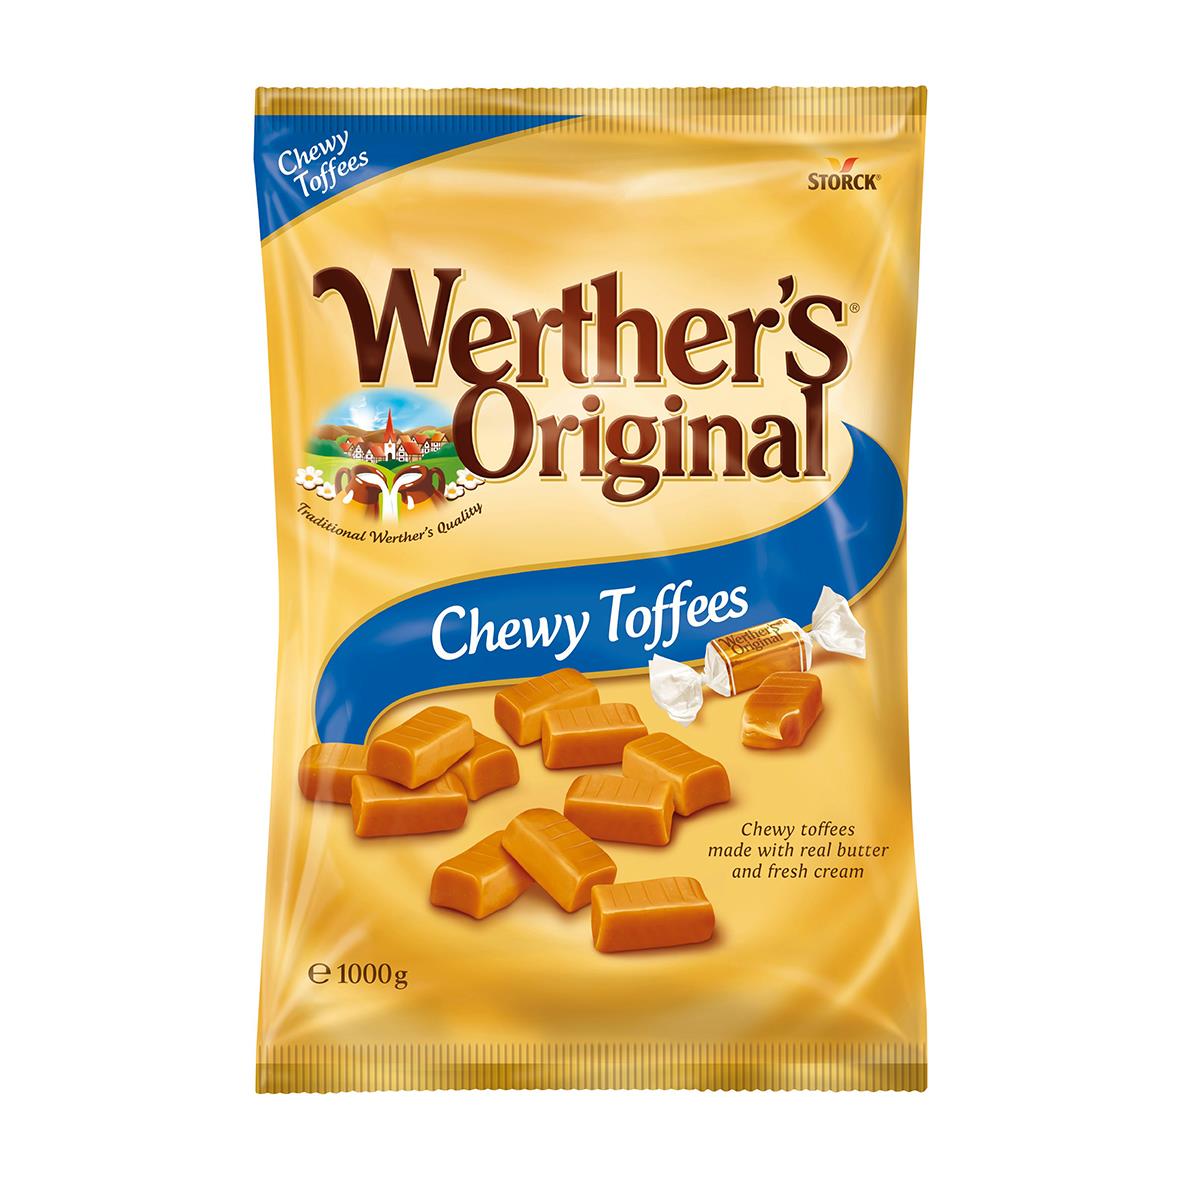 Godis Werther's Chewy Toffees 1000g